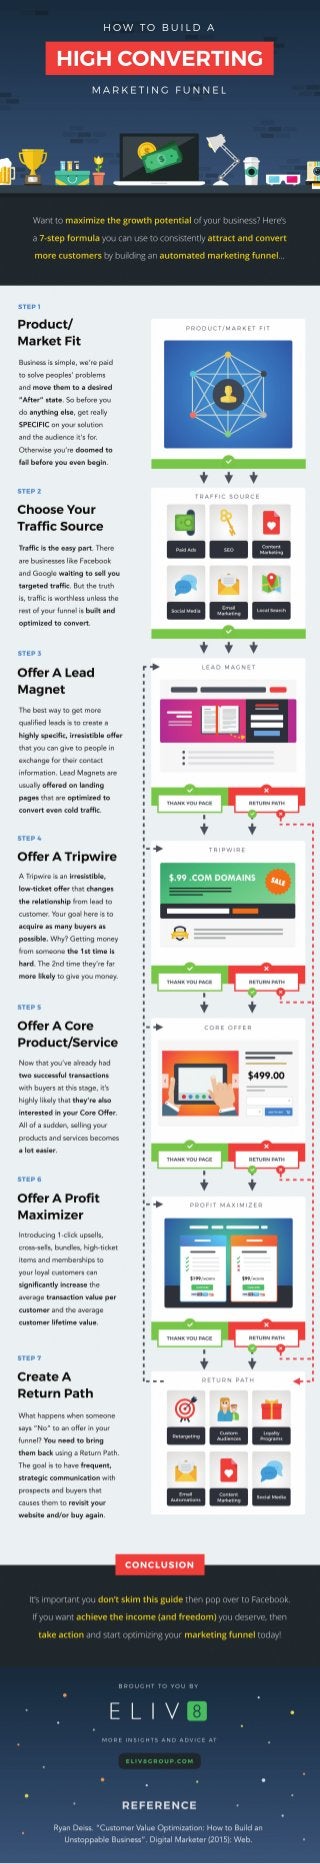 How To Build A High Converting Marketing Funnel (Infographic)